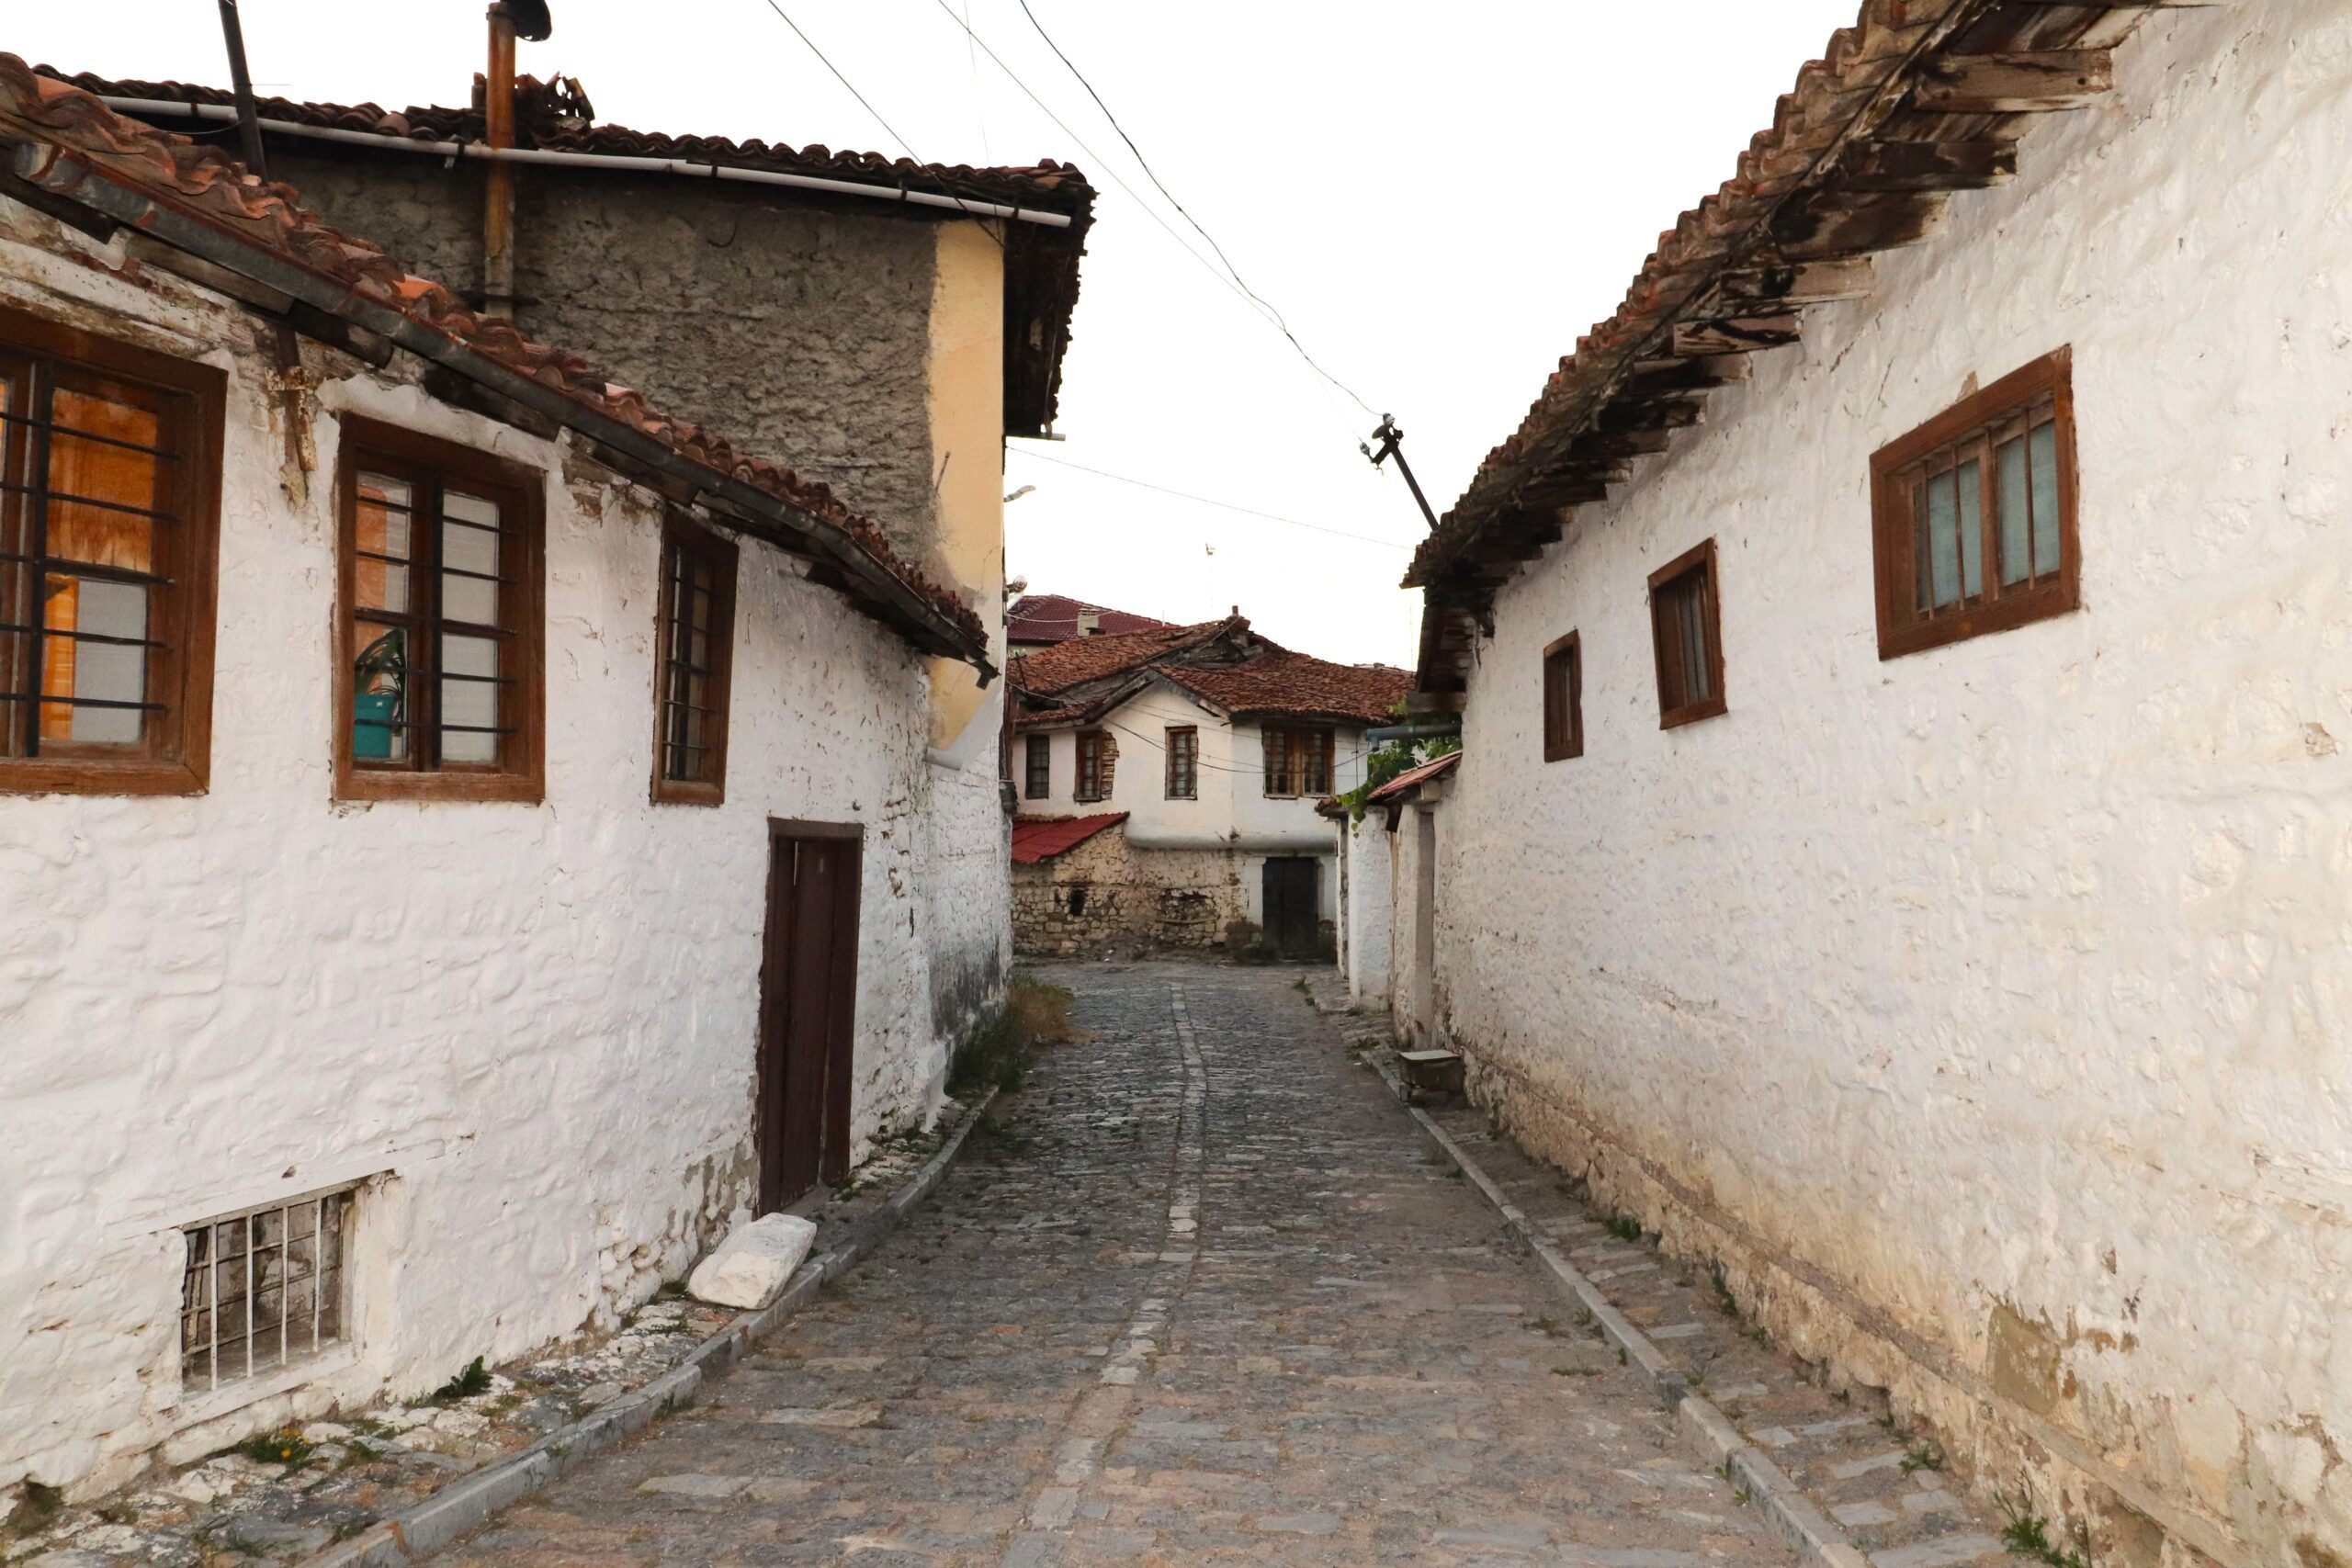 11 Best Things to Do in Korca